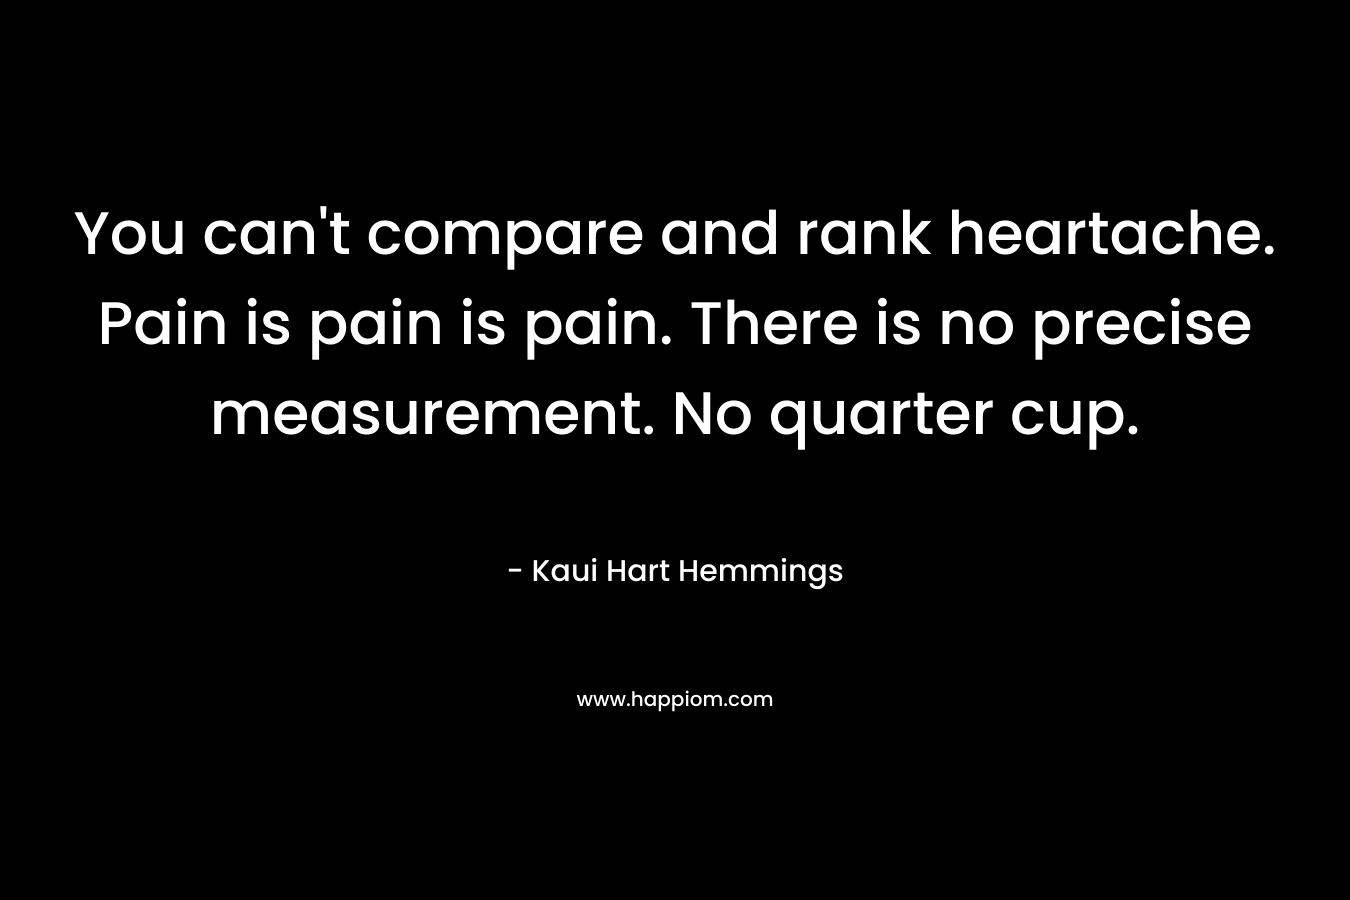 You can’t compare and rank heartache. Pain is pain is pain. There is no precise measurement. No quarter cup. – Kaui Hart Hemmings